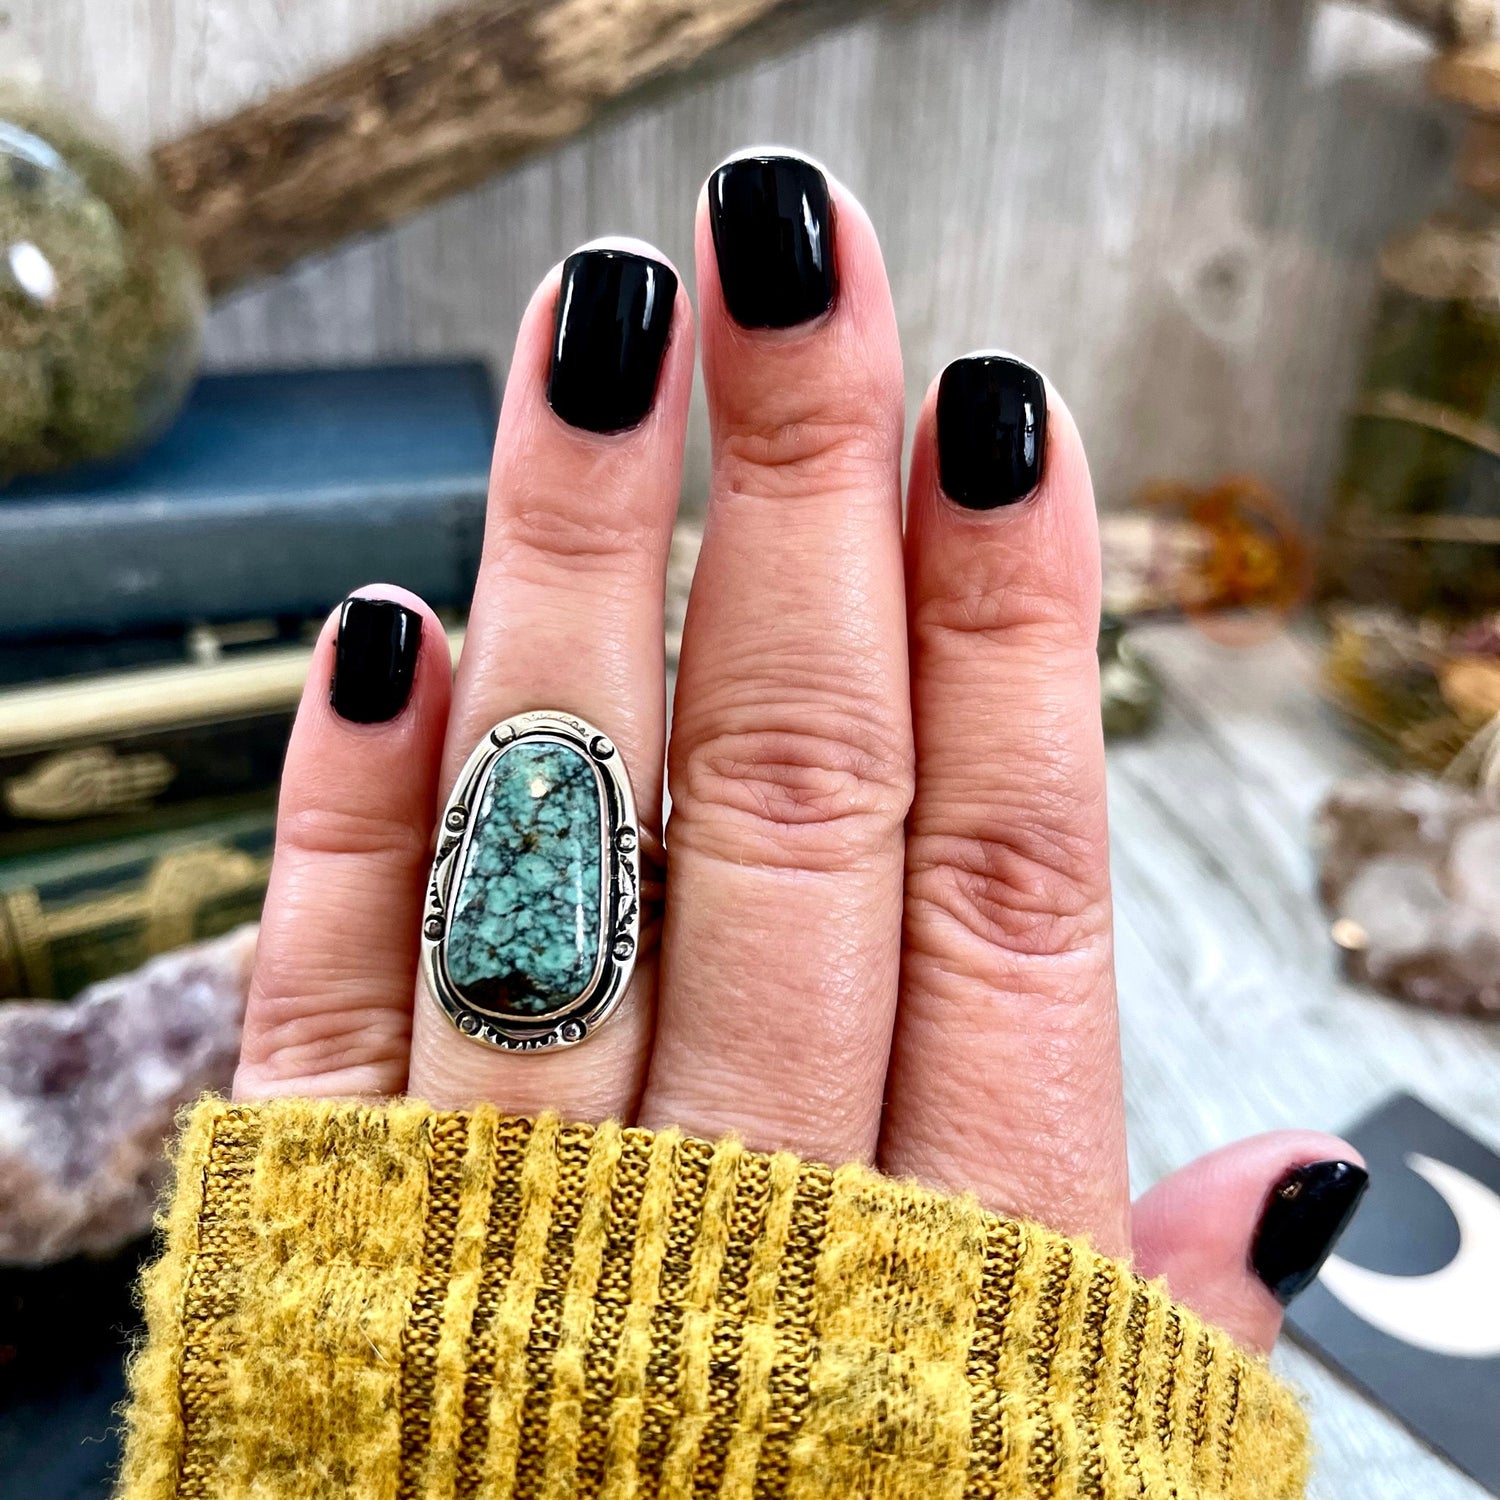 Size 8 Turquoise ( # 8 Turquoise) Statement Ring Set in Sterling Silver / Curated by FOXLARK Collection